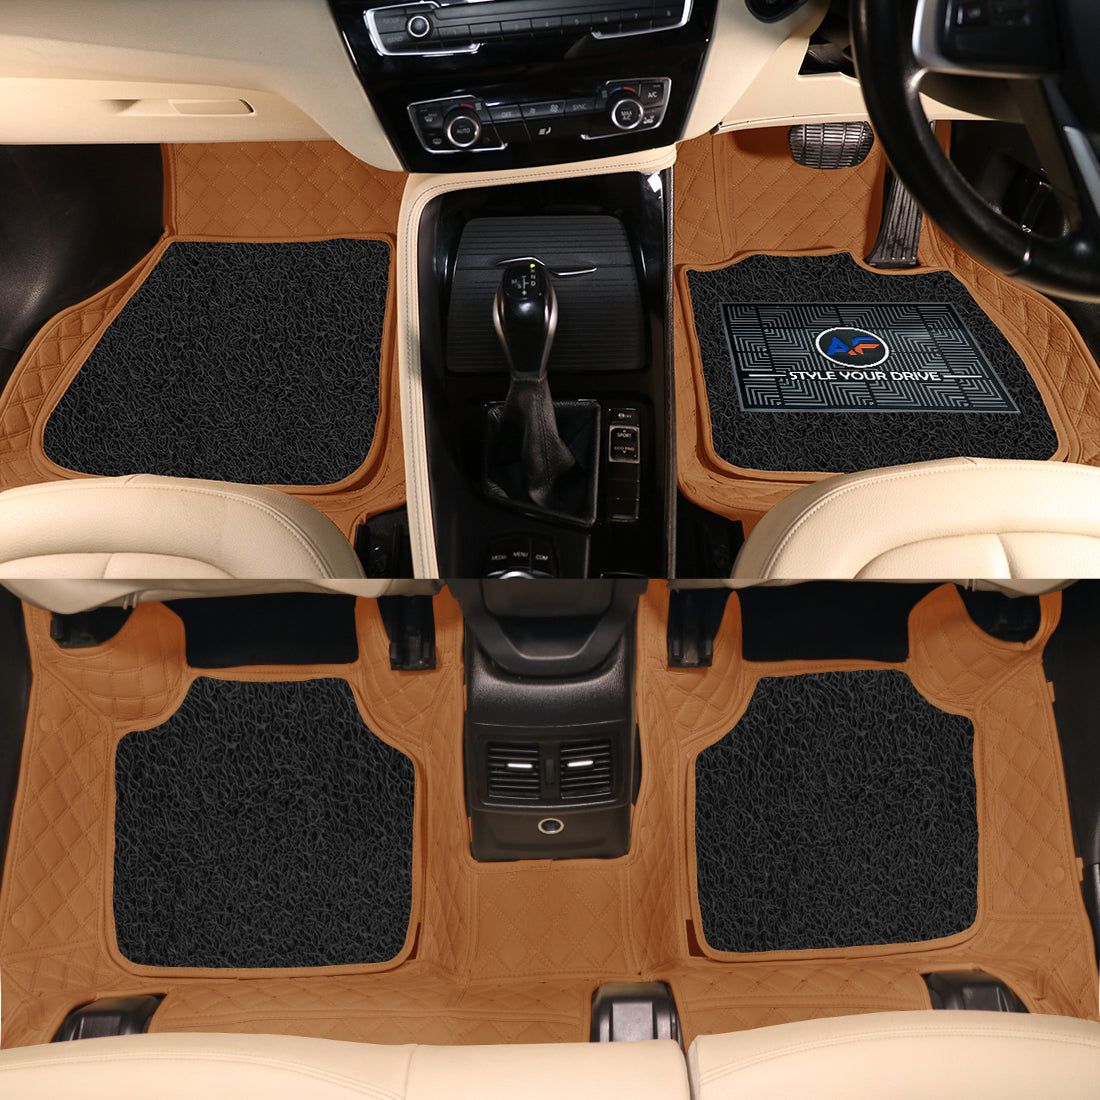 Hyundai Grand i10 2013-19-7D Luxury Car Mat, All Weather Proof, Anti-Skid, 100% Waterproof & Odorless with Unique Diamond Fish Design (24mm Luxury PU Leather, 2 Rows)